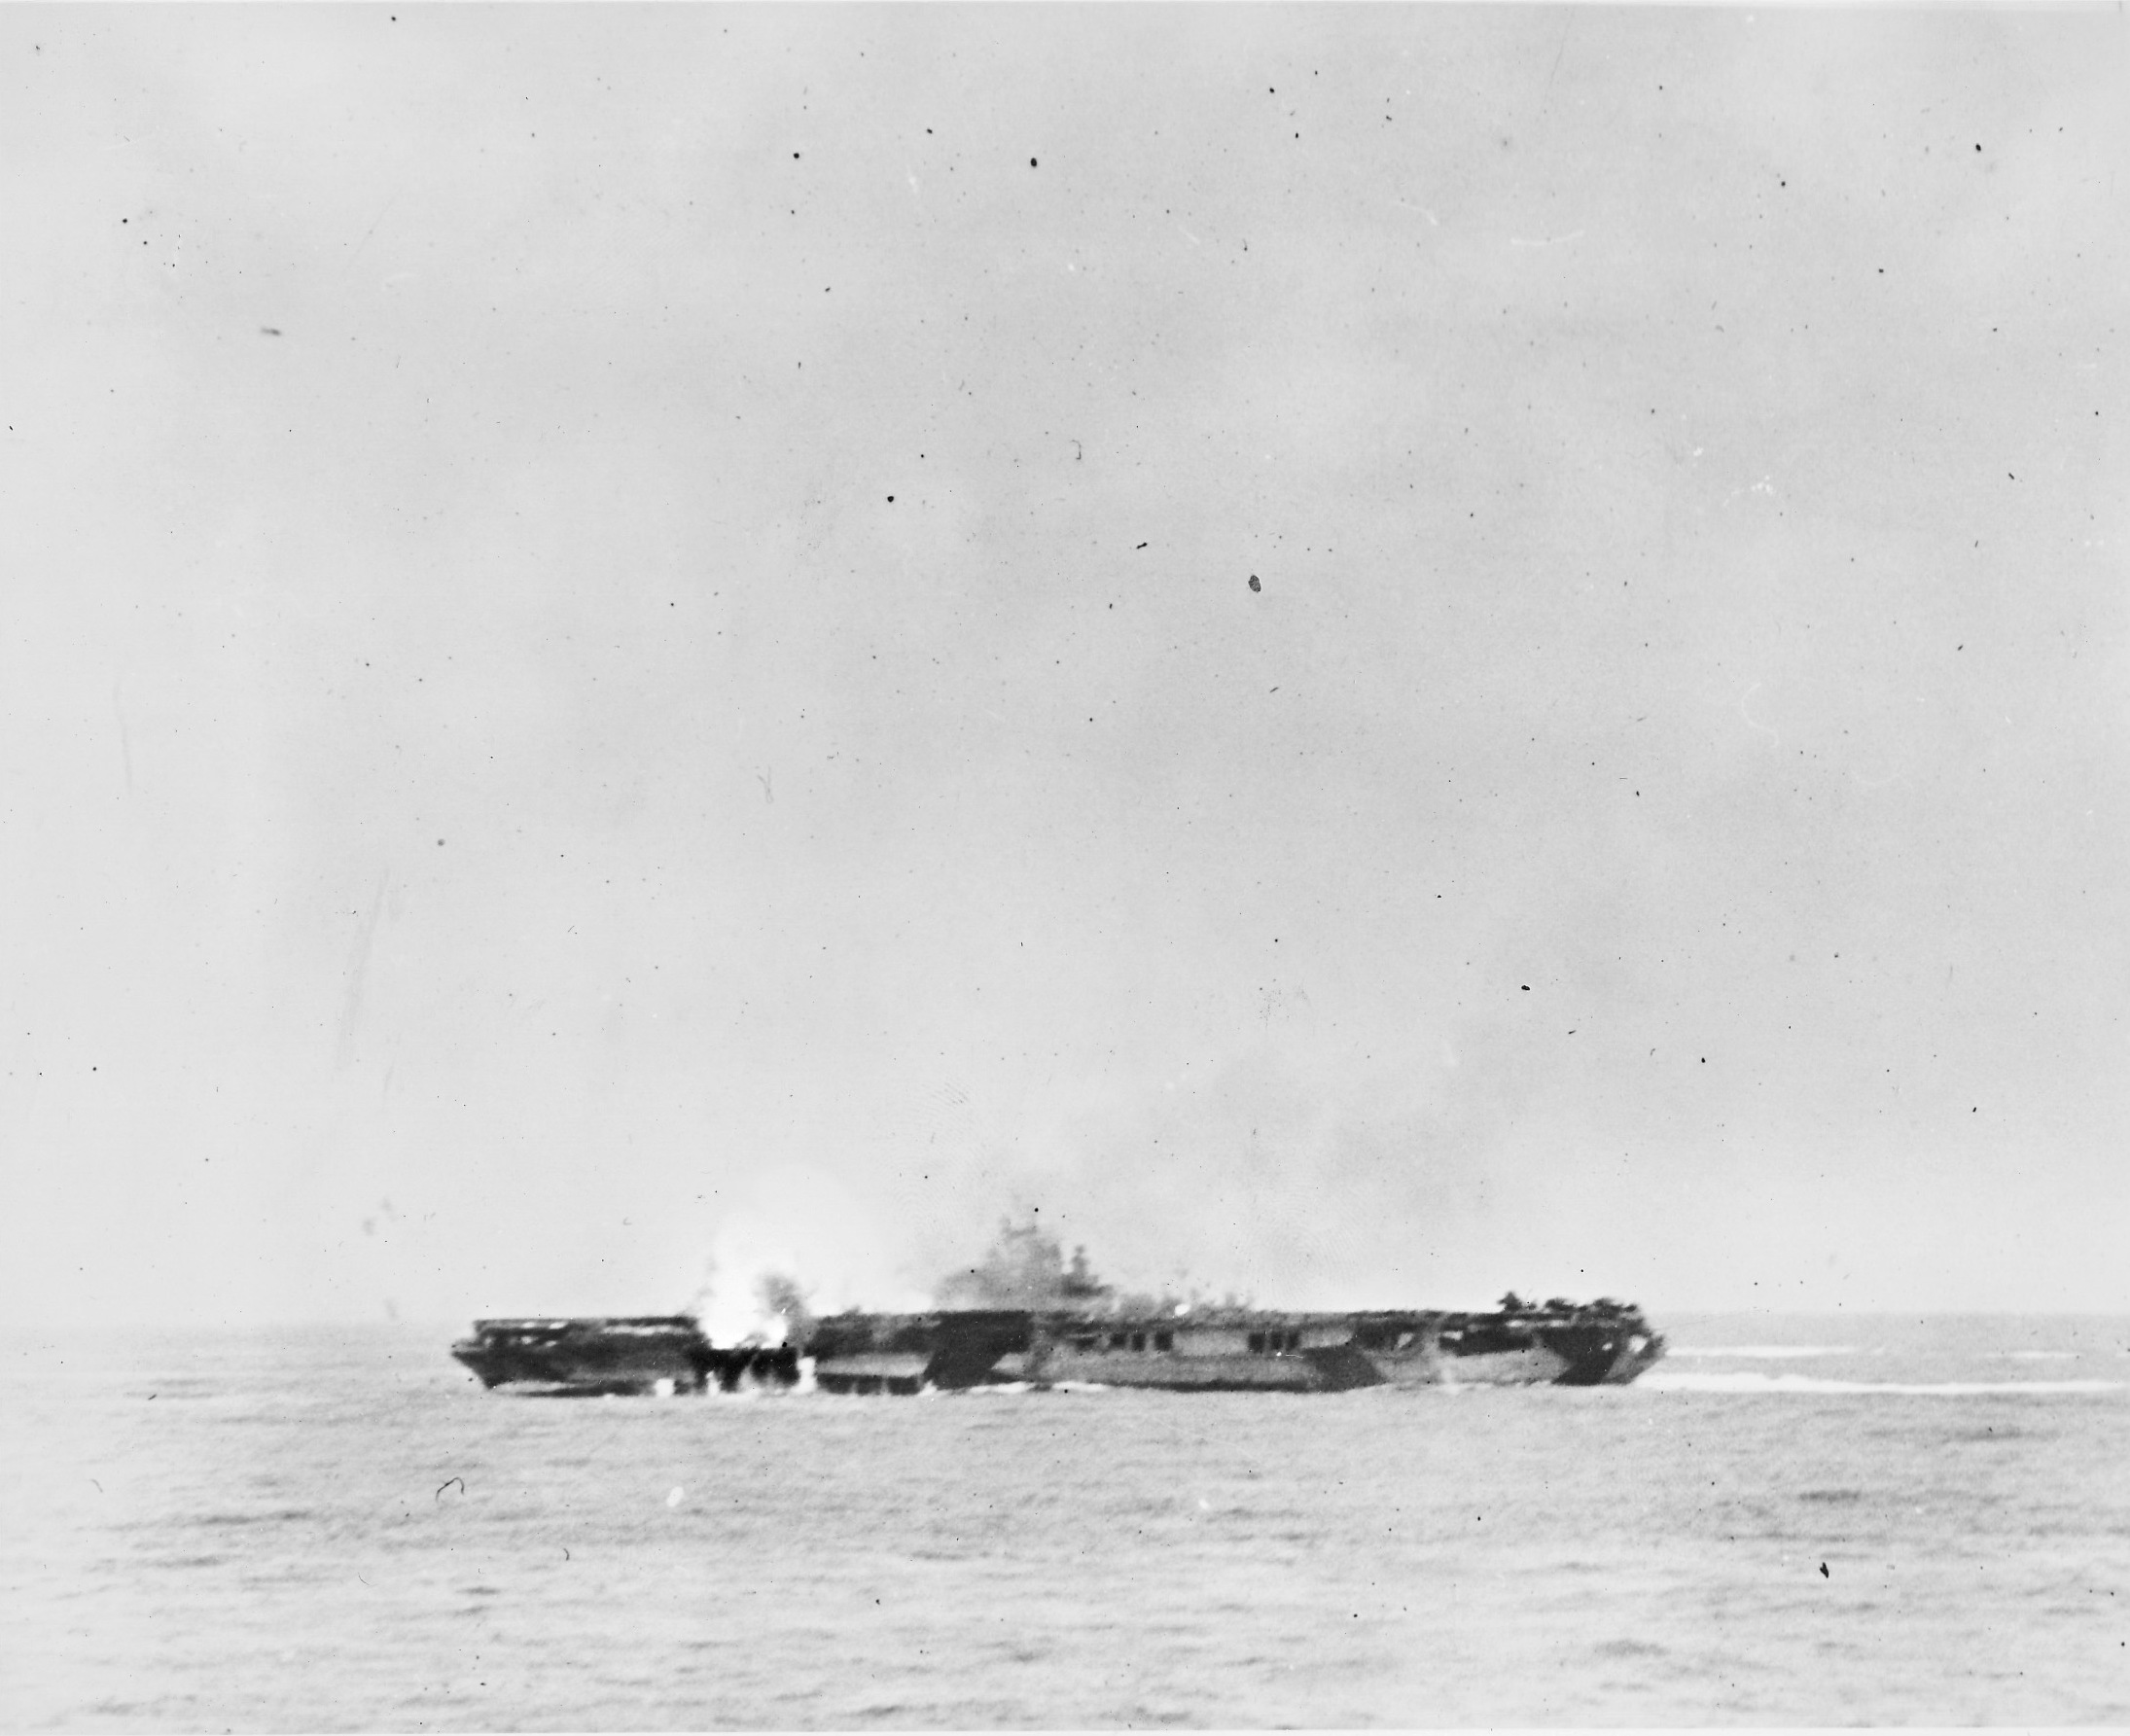 A Japanese special attack aircraft exploding on the deck of USS Hancock off Okinawa, Japan, 7 Apr 1945